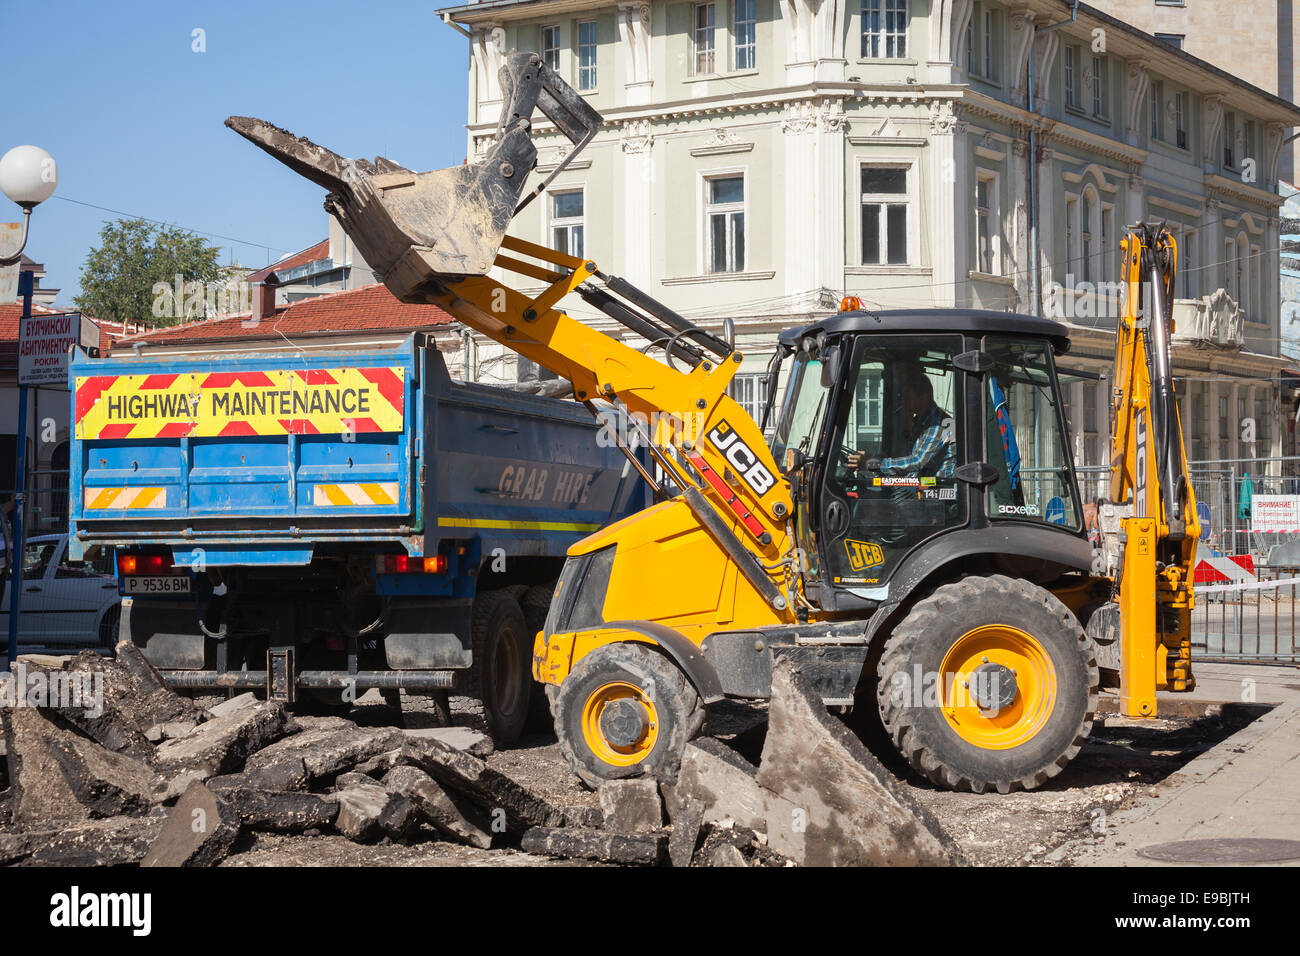 Ruse, Bulgaria - September 29, 2014: Road works. Highway maintenance, man in yellow tractor removes old asphalt pavement and loa Stock Photo